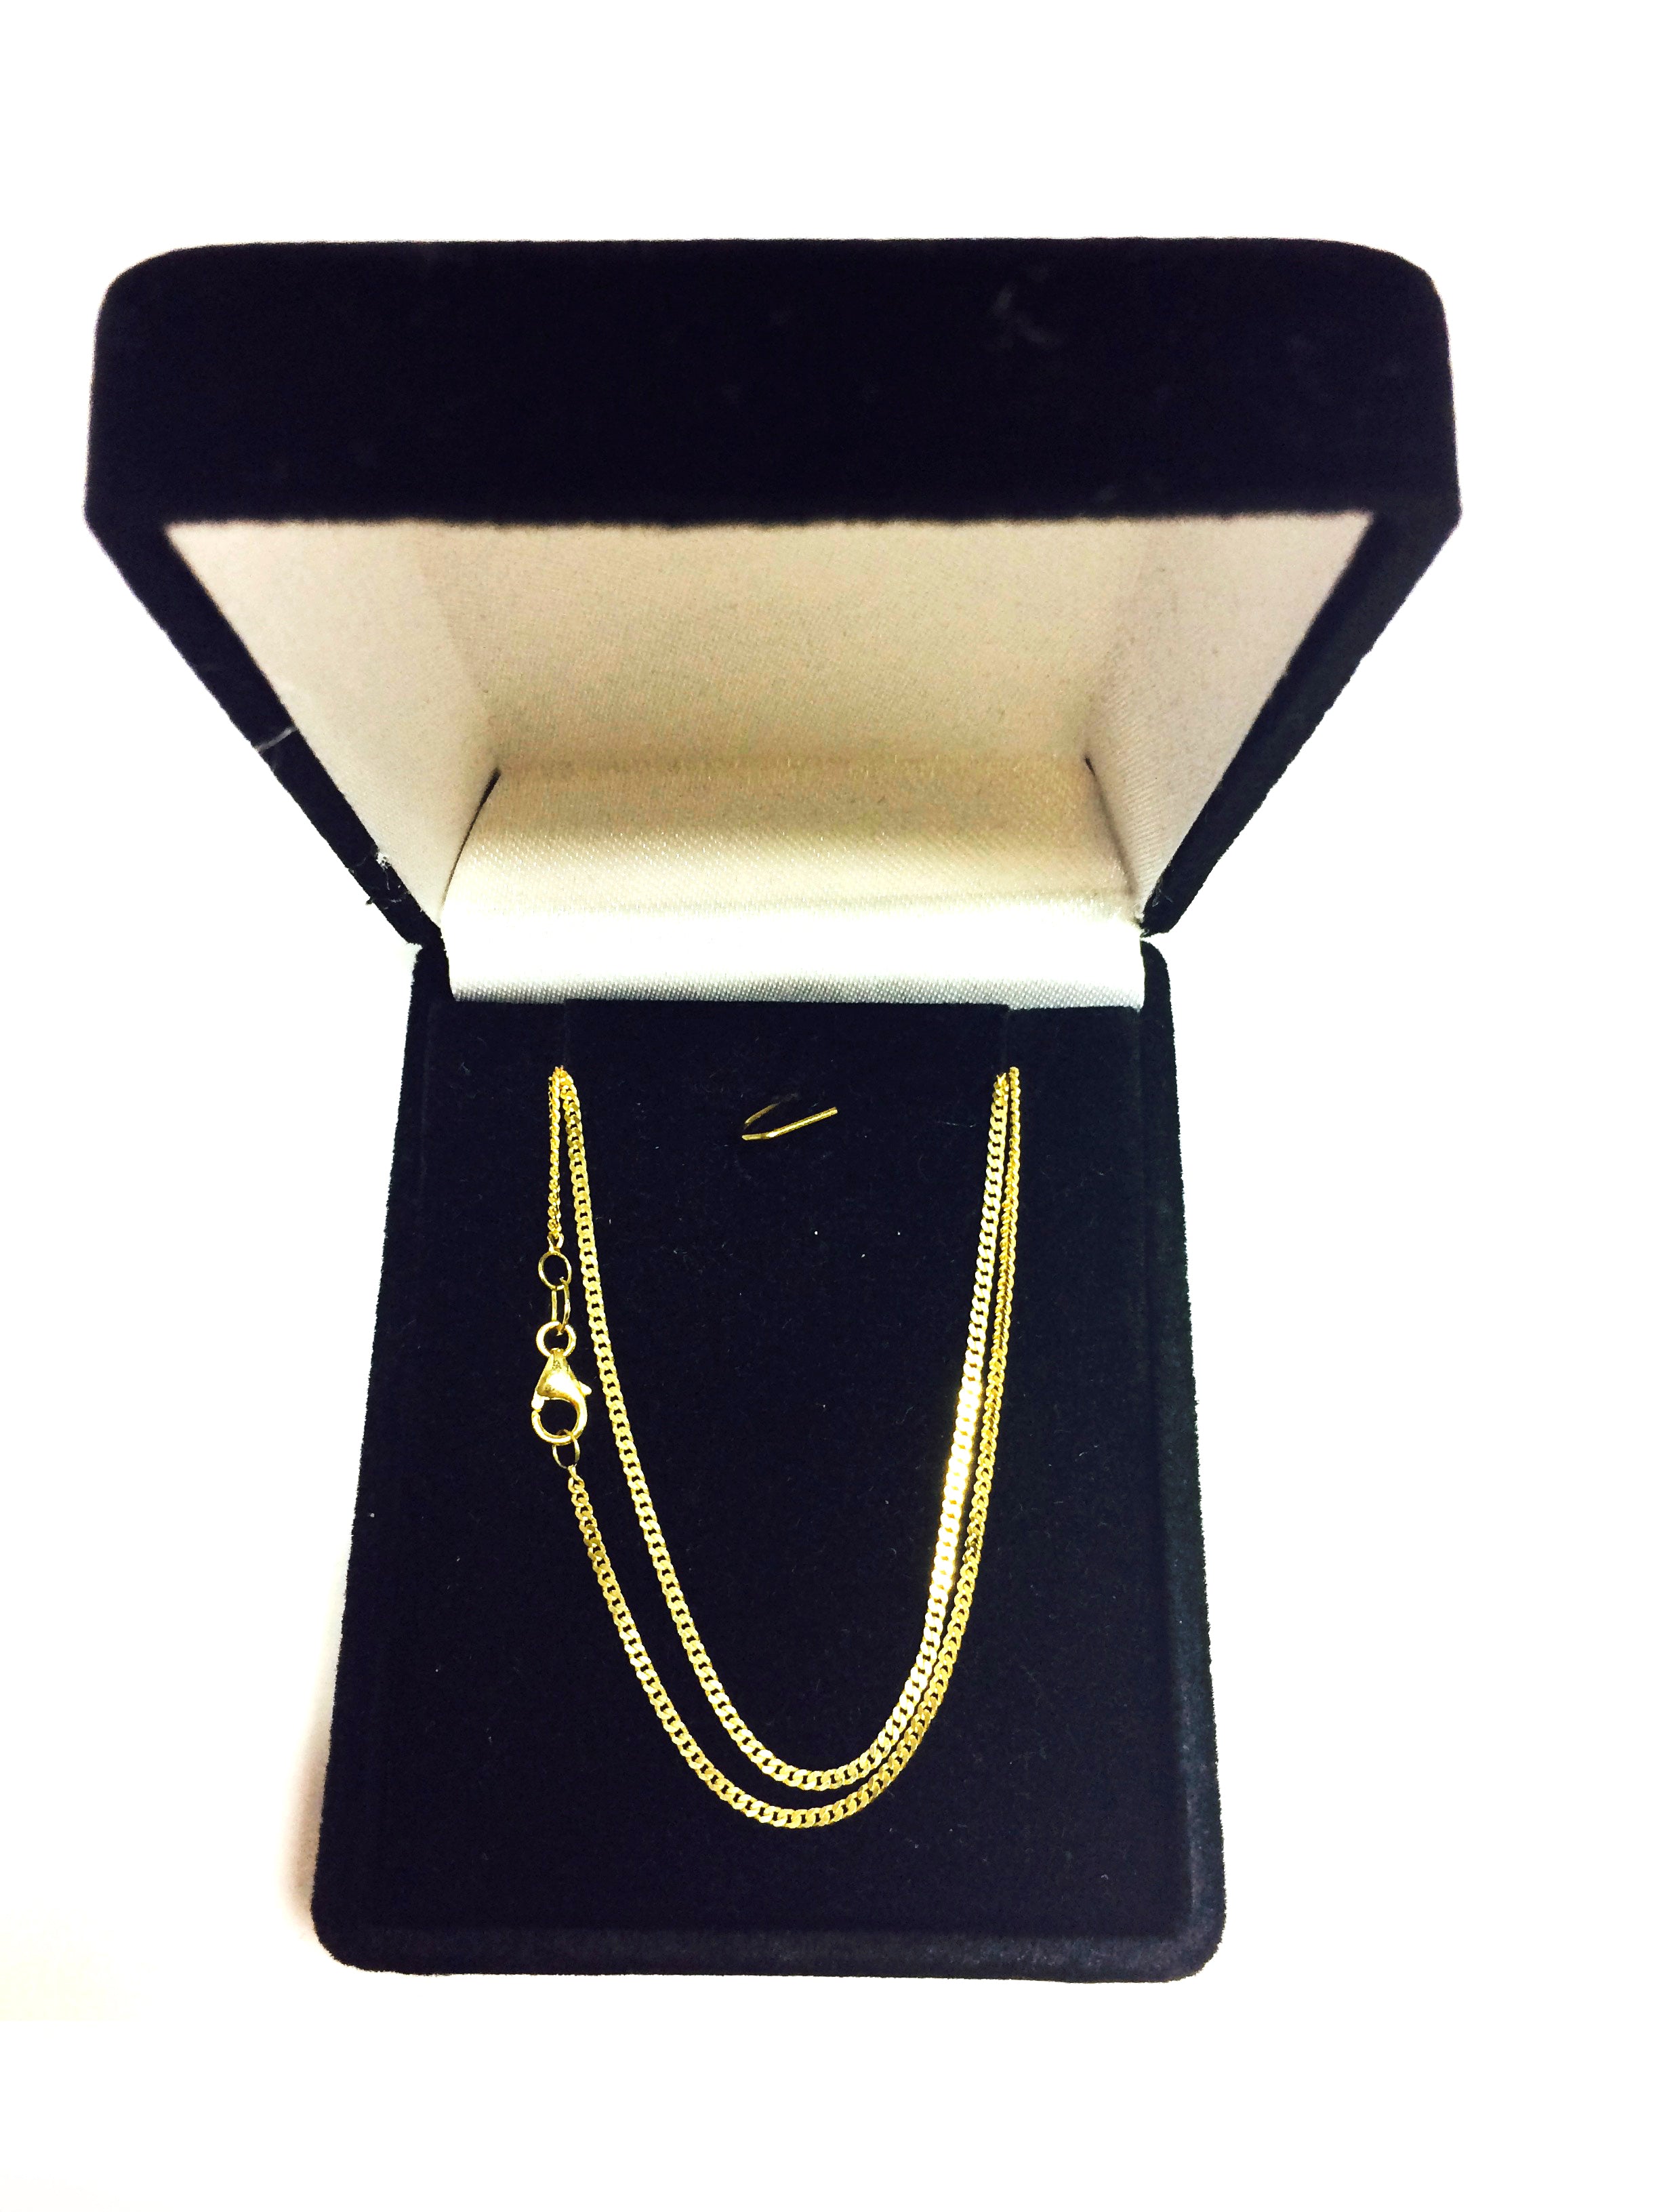 10k Yellow Gold Gourmette Chain Necklace, 1.5mm fine designer jewelry for men and women